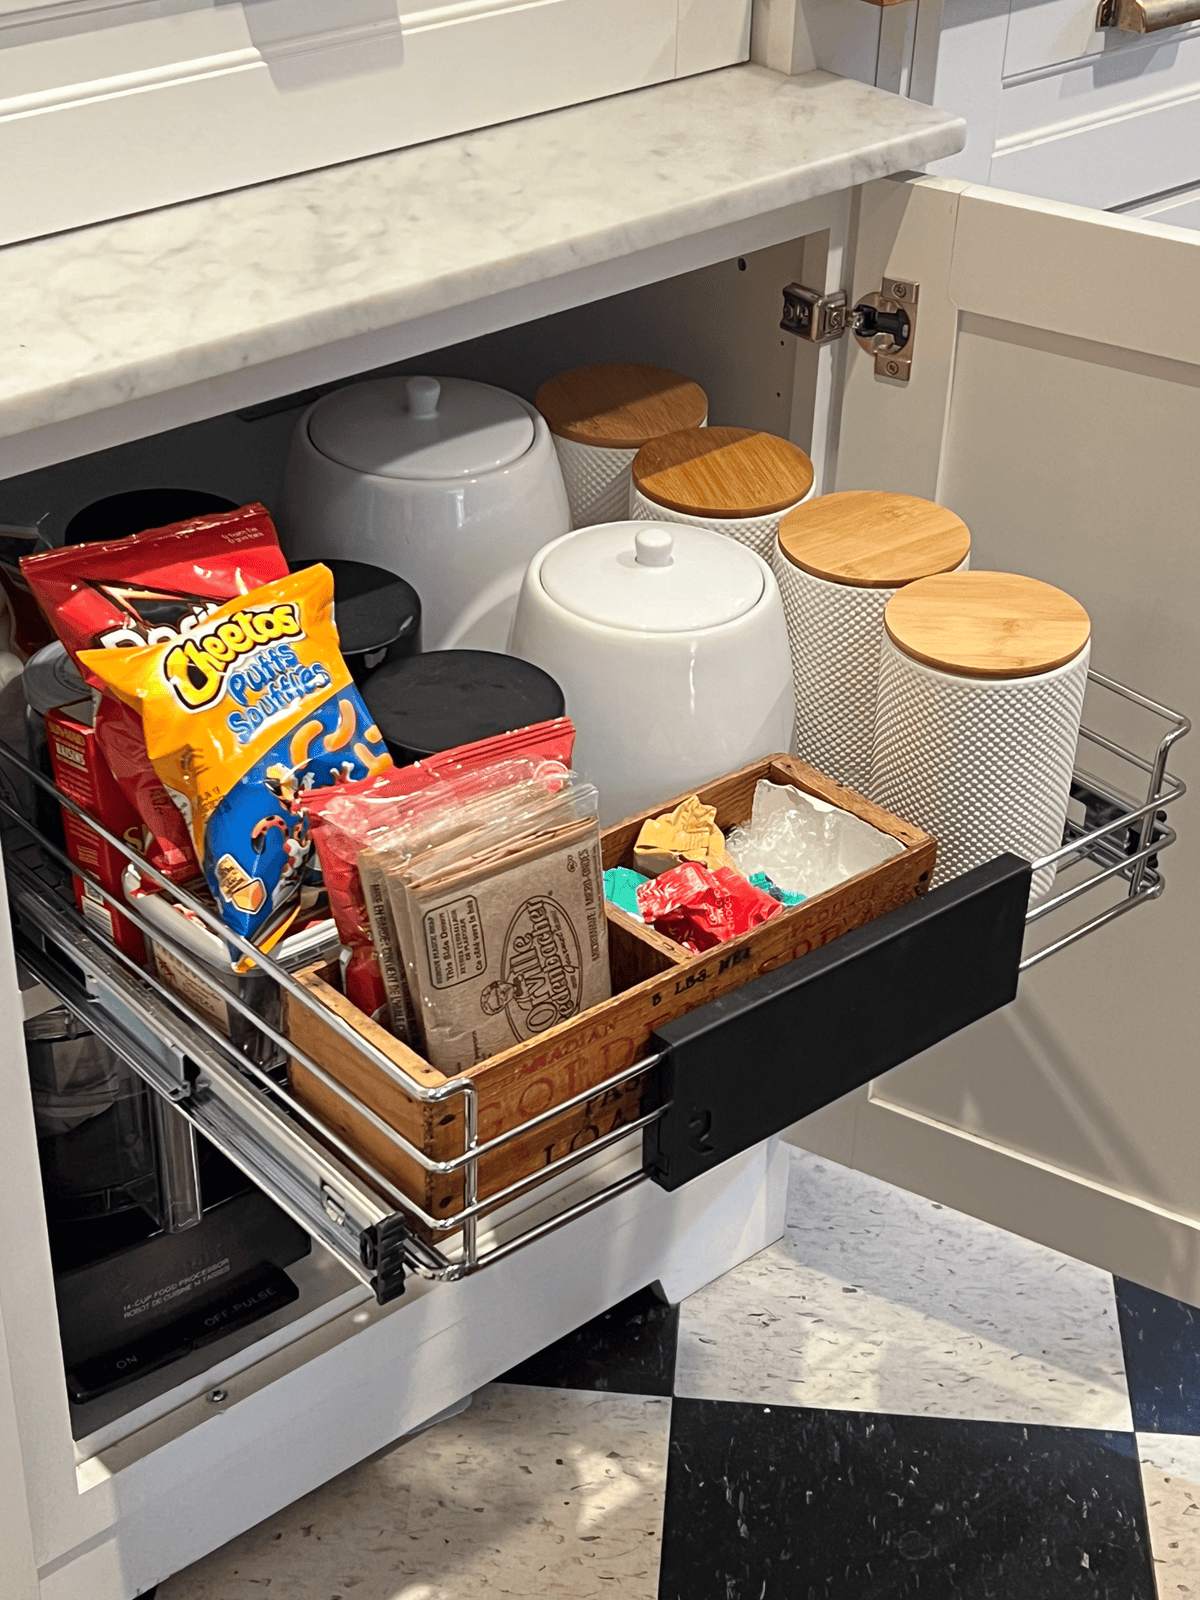 Pull out cabinet snack drawer with cheetos, popcorn, etc.